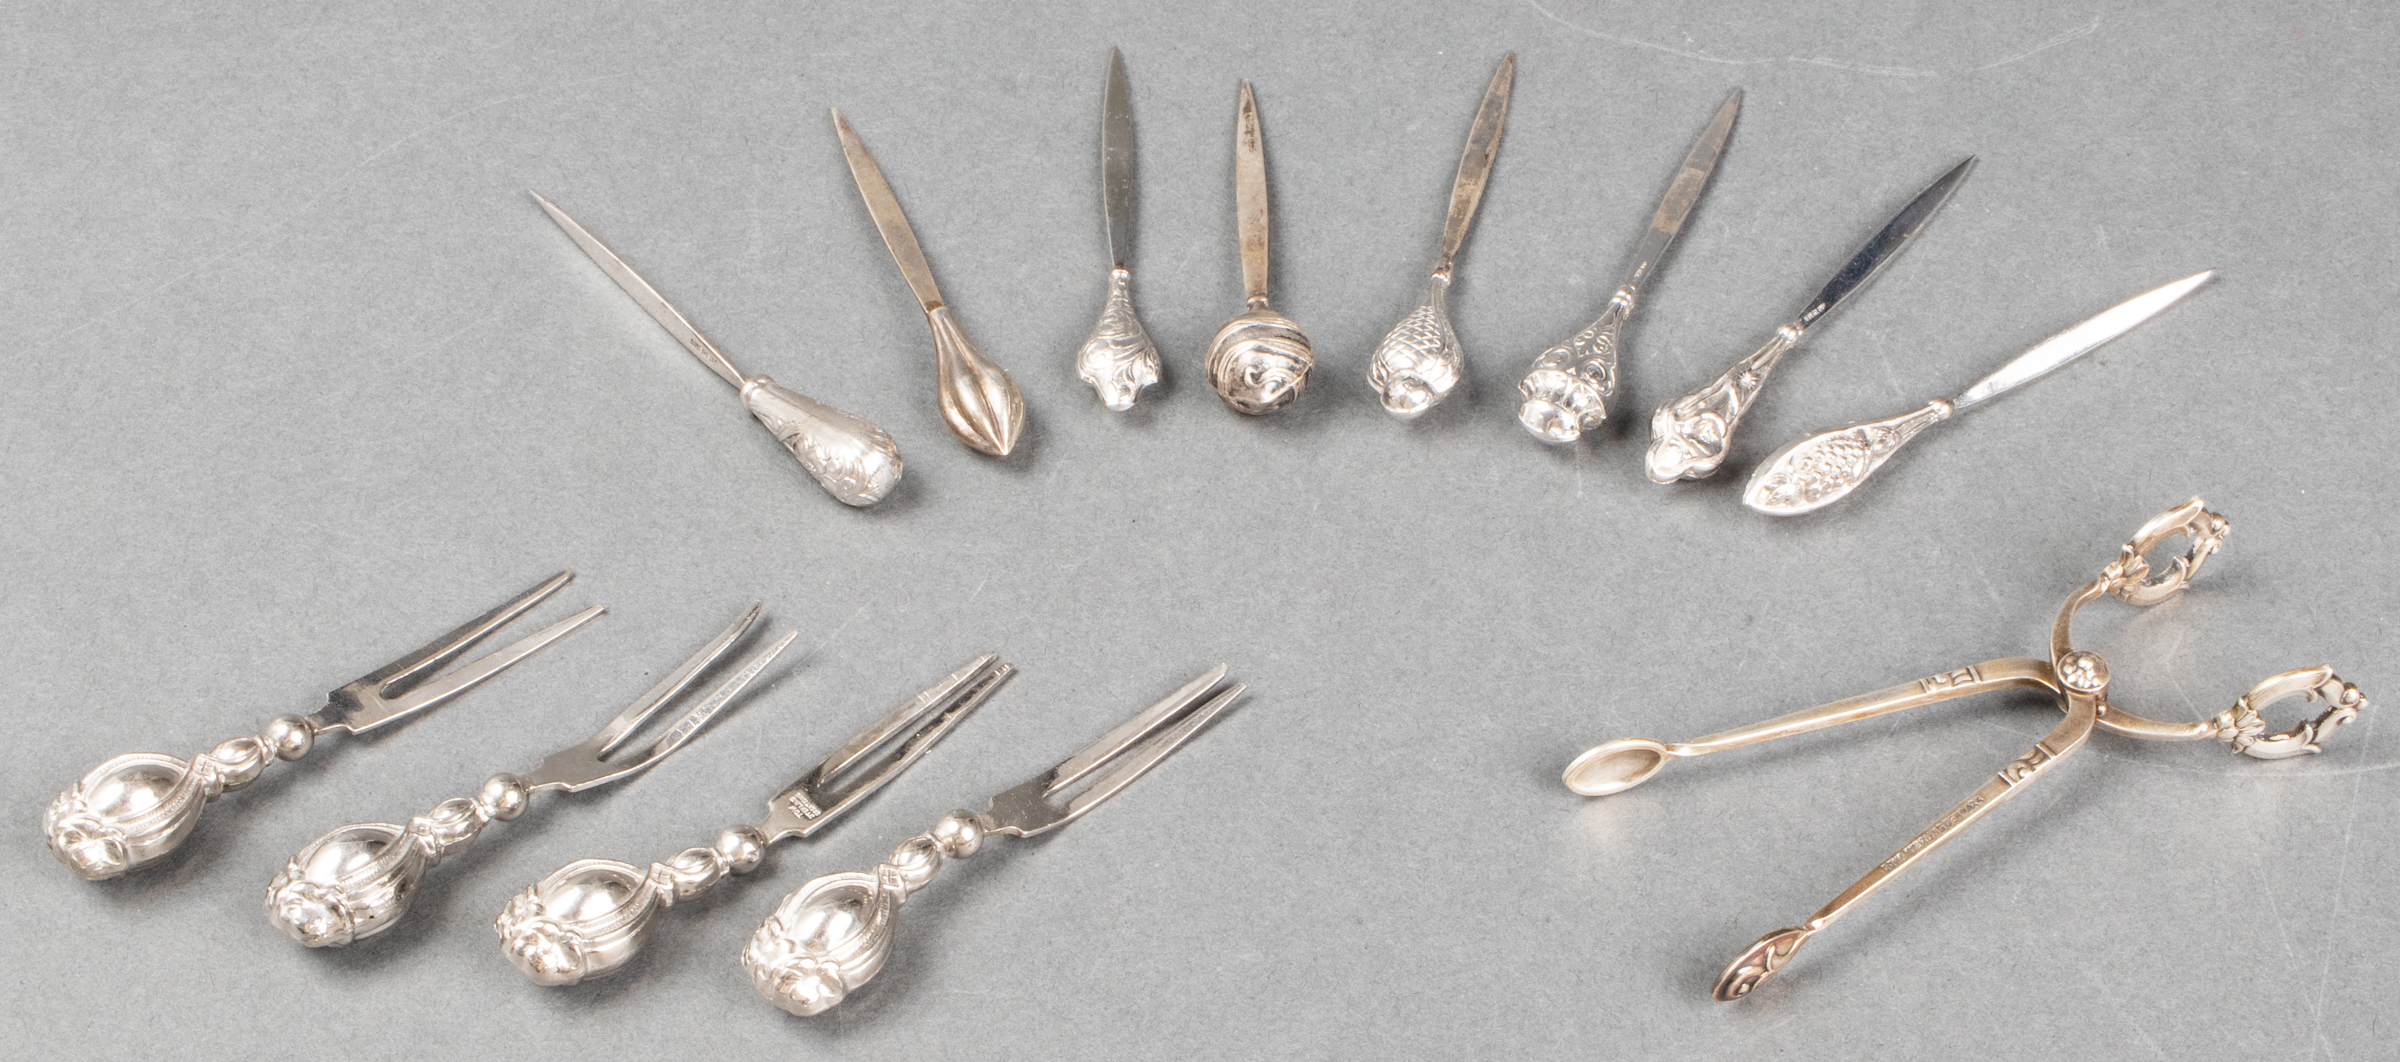 STERLING SILVER HOR D'OEUVRES PICKS